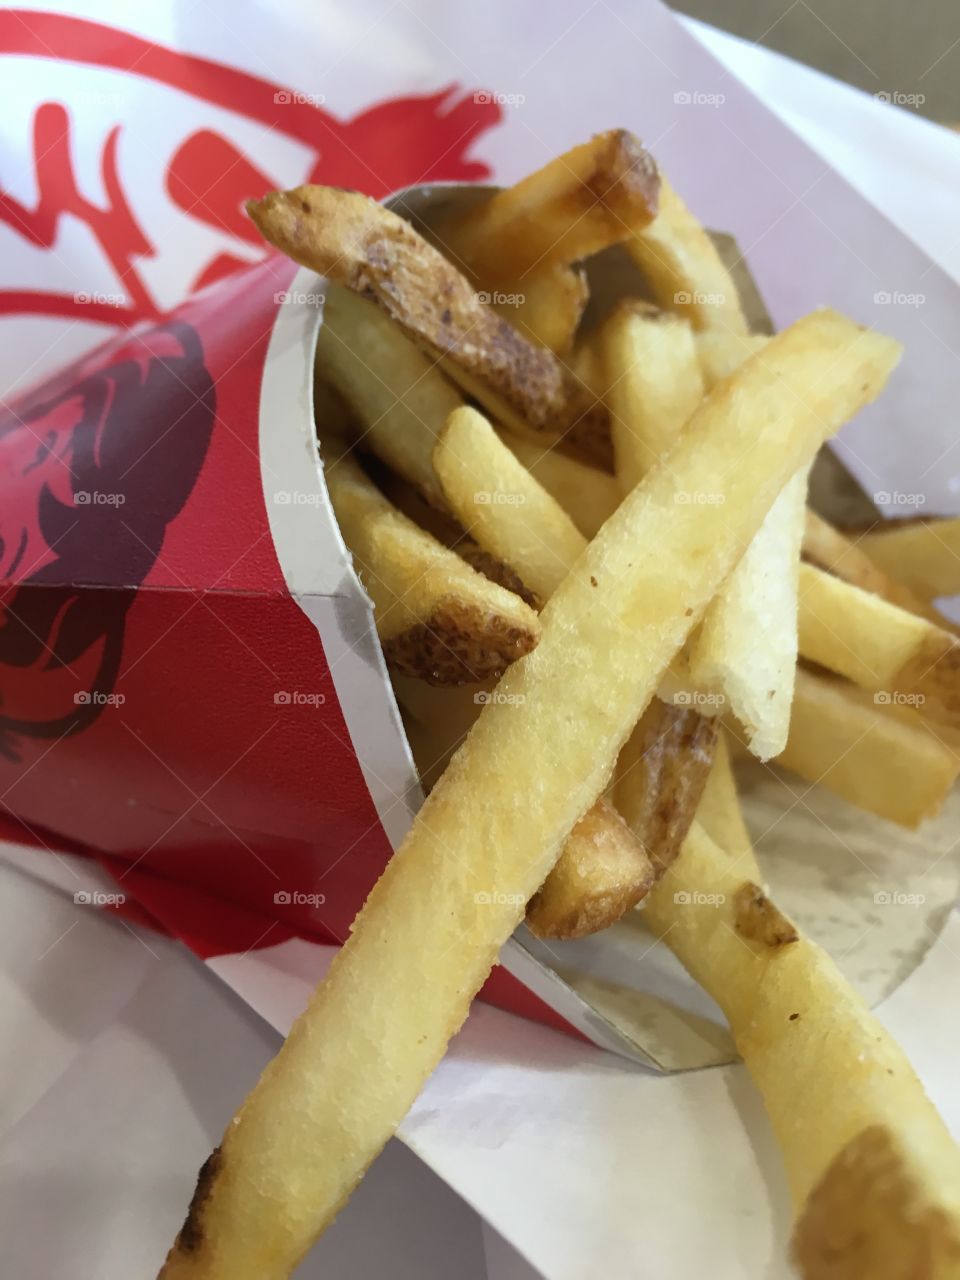 Wendy's French fries!